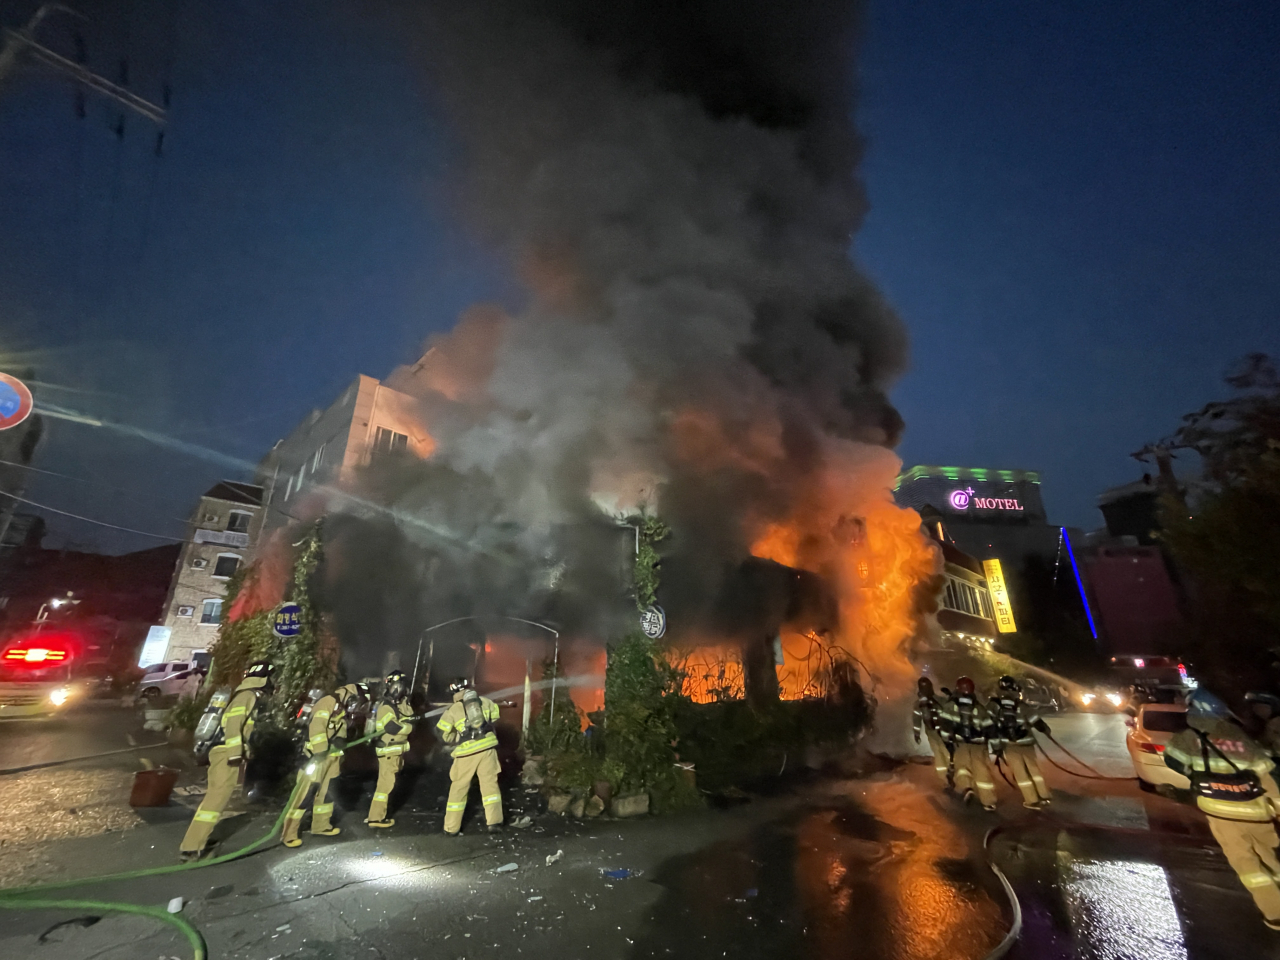 Firefighters respond to a fire that broke out in a restaurant on Monday at 6:44 p.m. in Bukbudong, Yangsan, South Gyeongsang Province. (South Gyeongsang Province Fire Department)